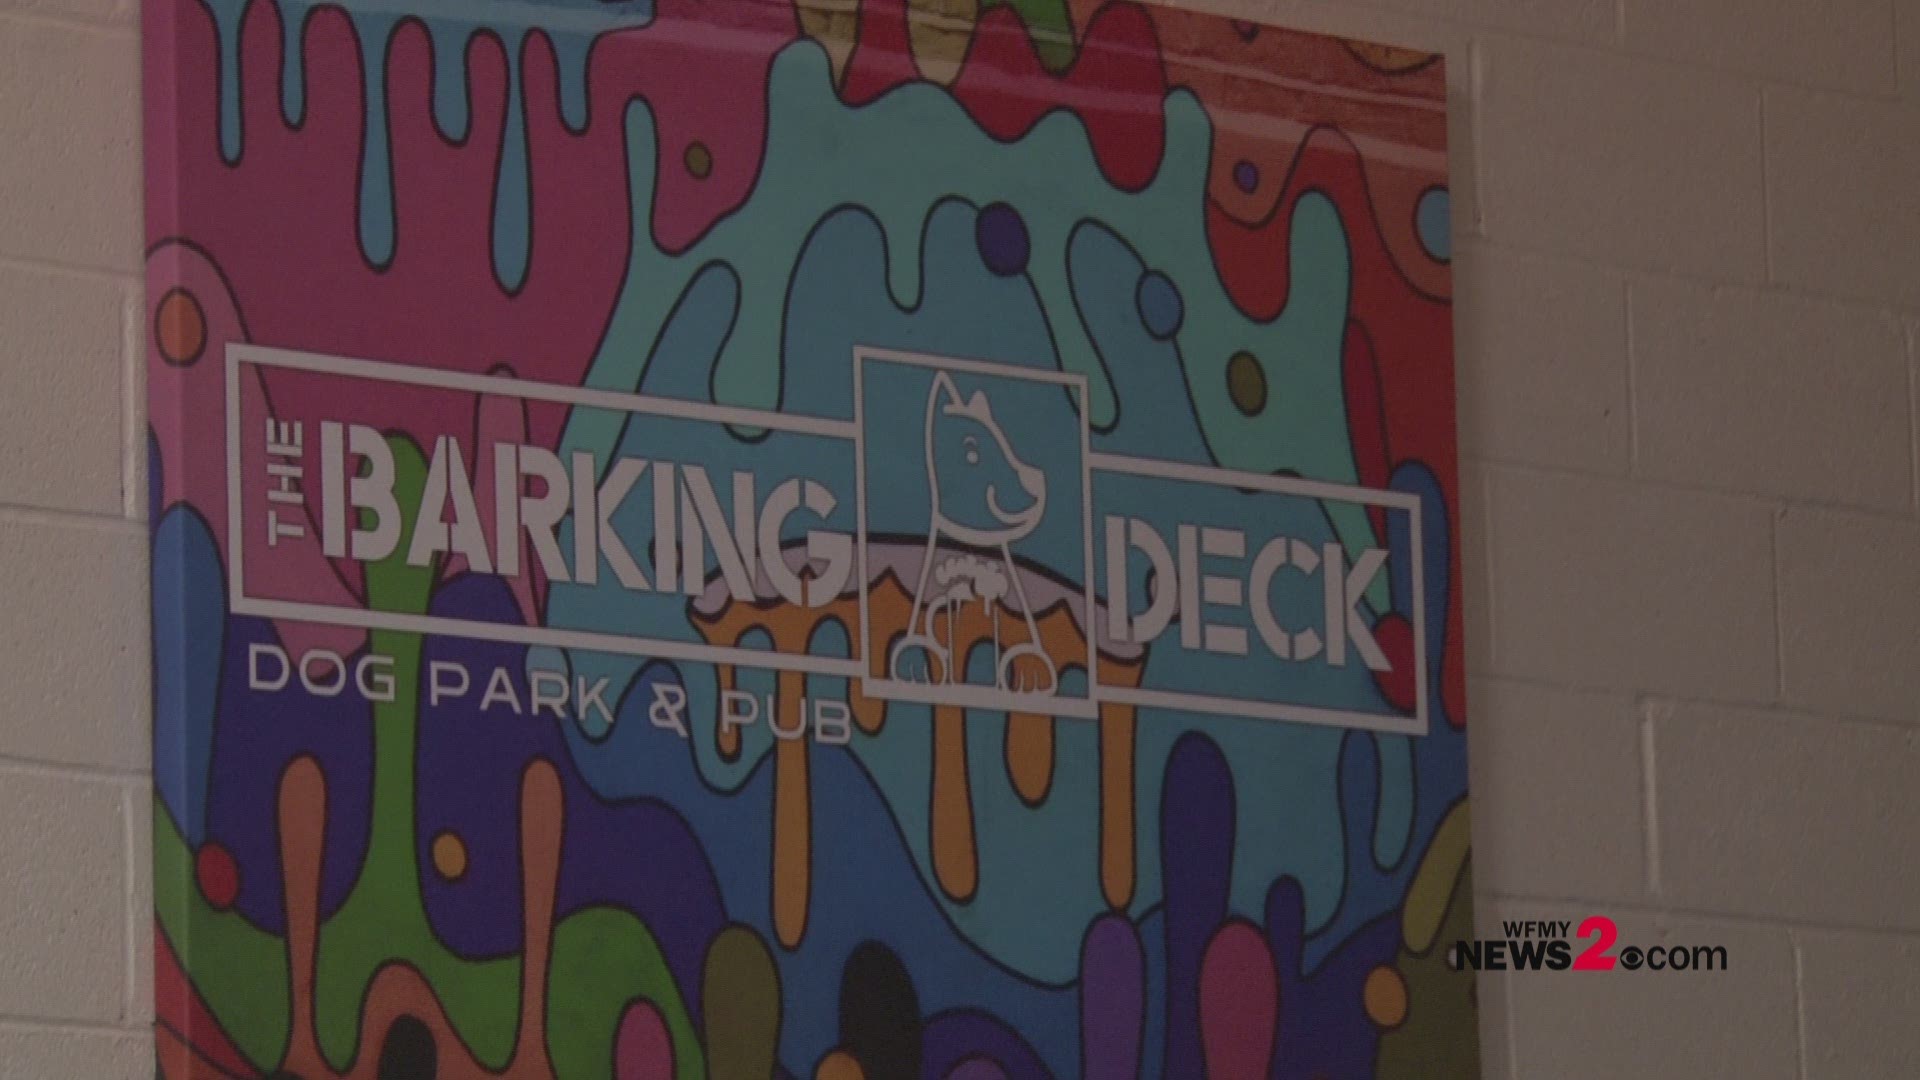 The Barking Deck is the Triad's first indoor dog park and pub.